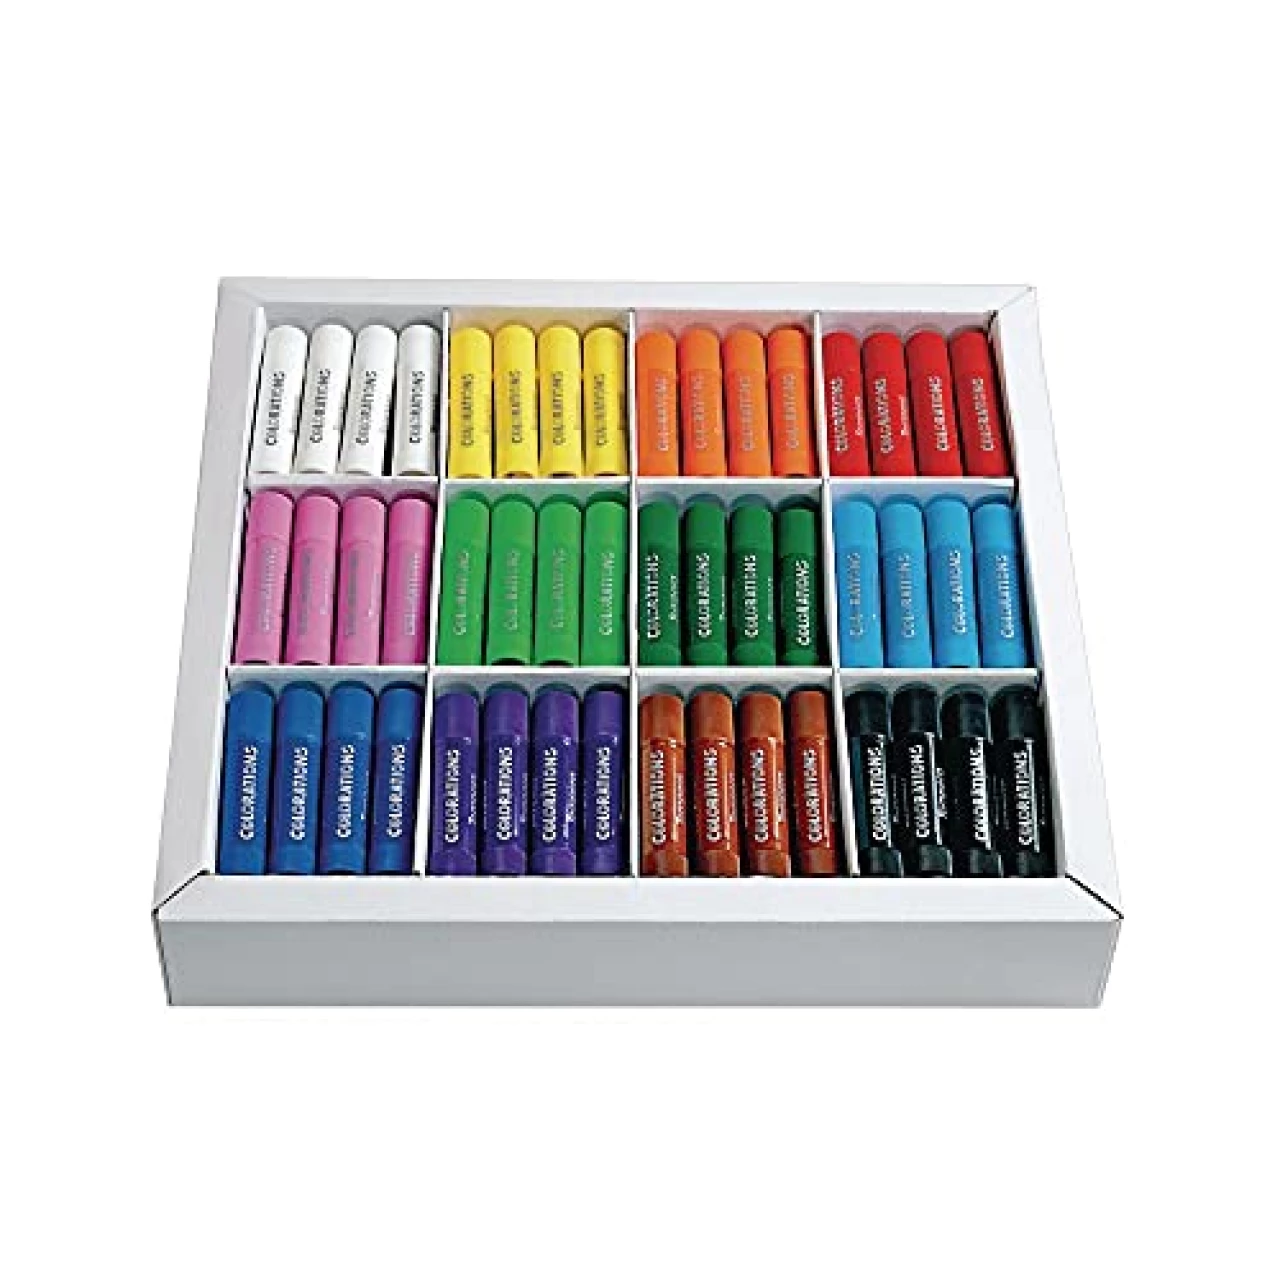 Discount School Supply TEMST144 Colorations Tempera Paint Sticks for Kids, Set of 144